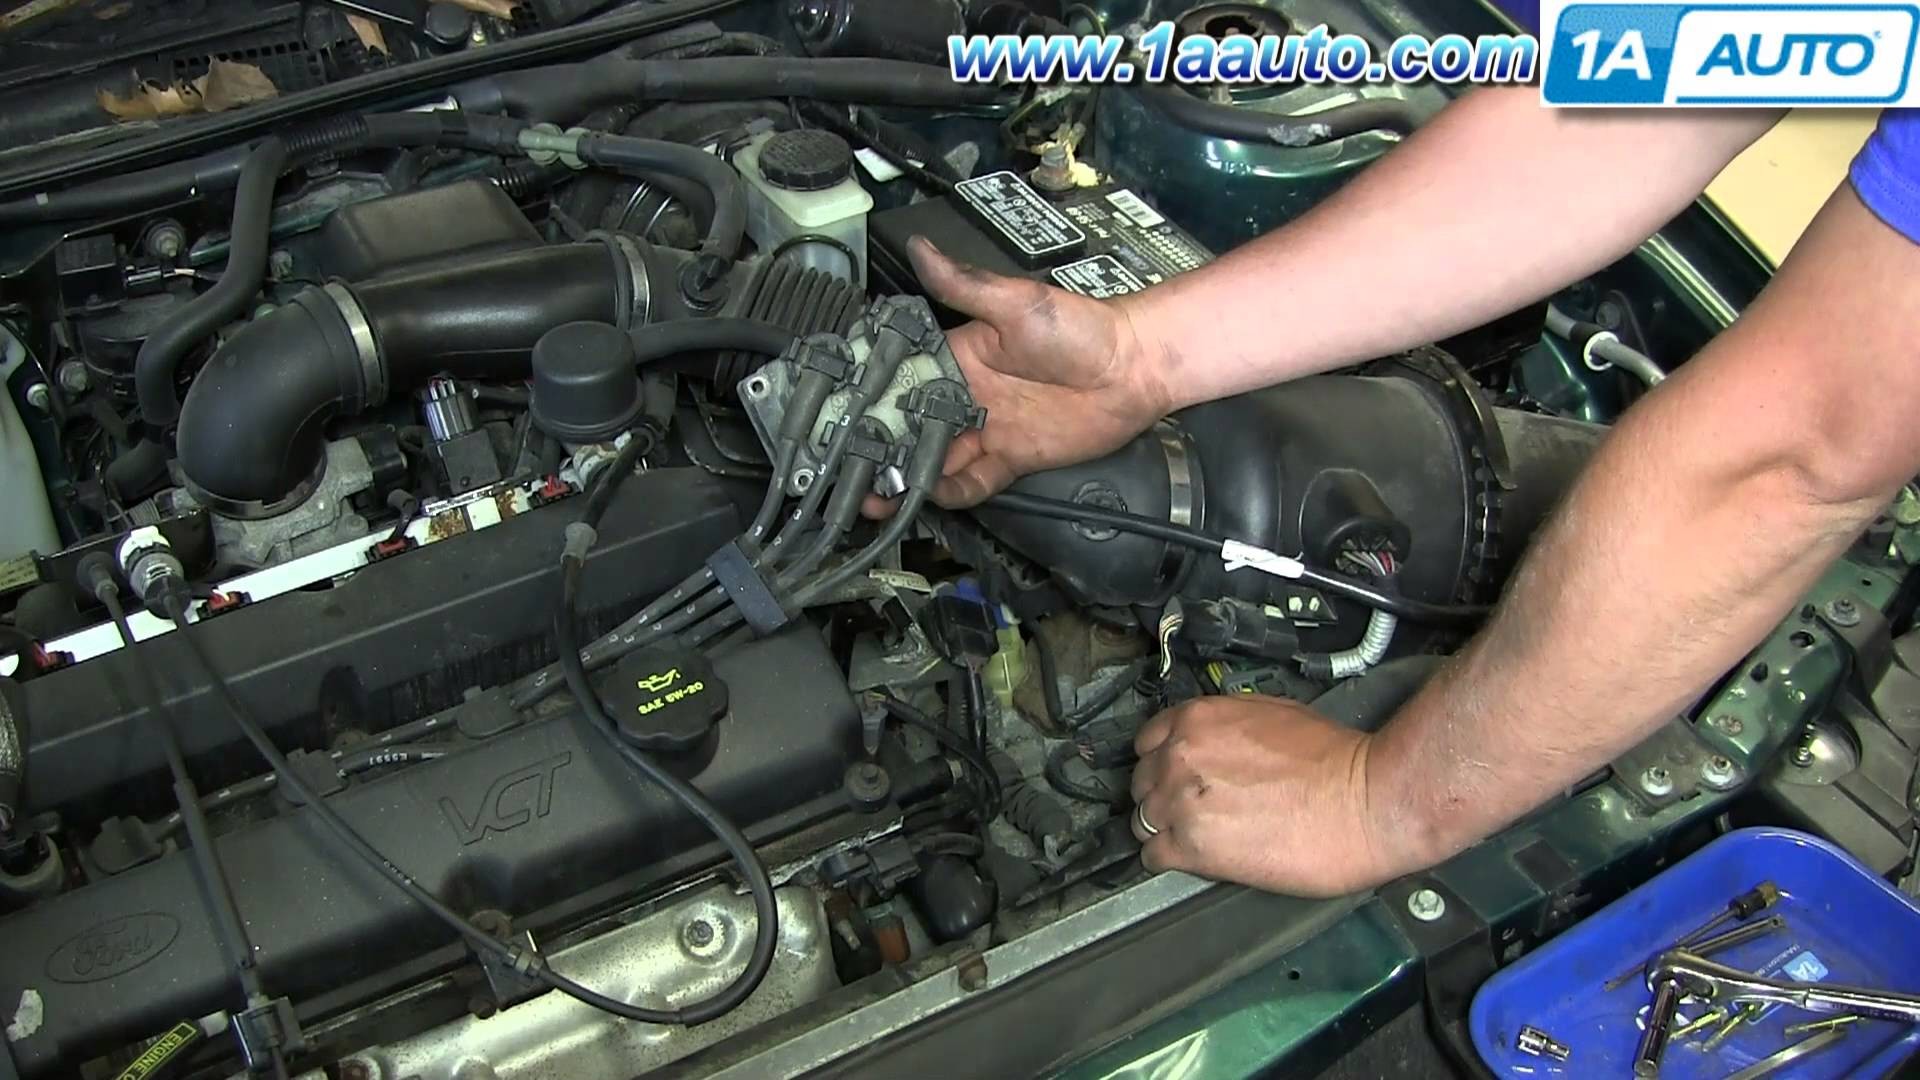 1999 ford Escort Zx2 Engine Diagram How to Replace Fix Engine Ignition Coil 1998 03 ford Escort Zx2 2 0l